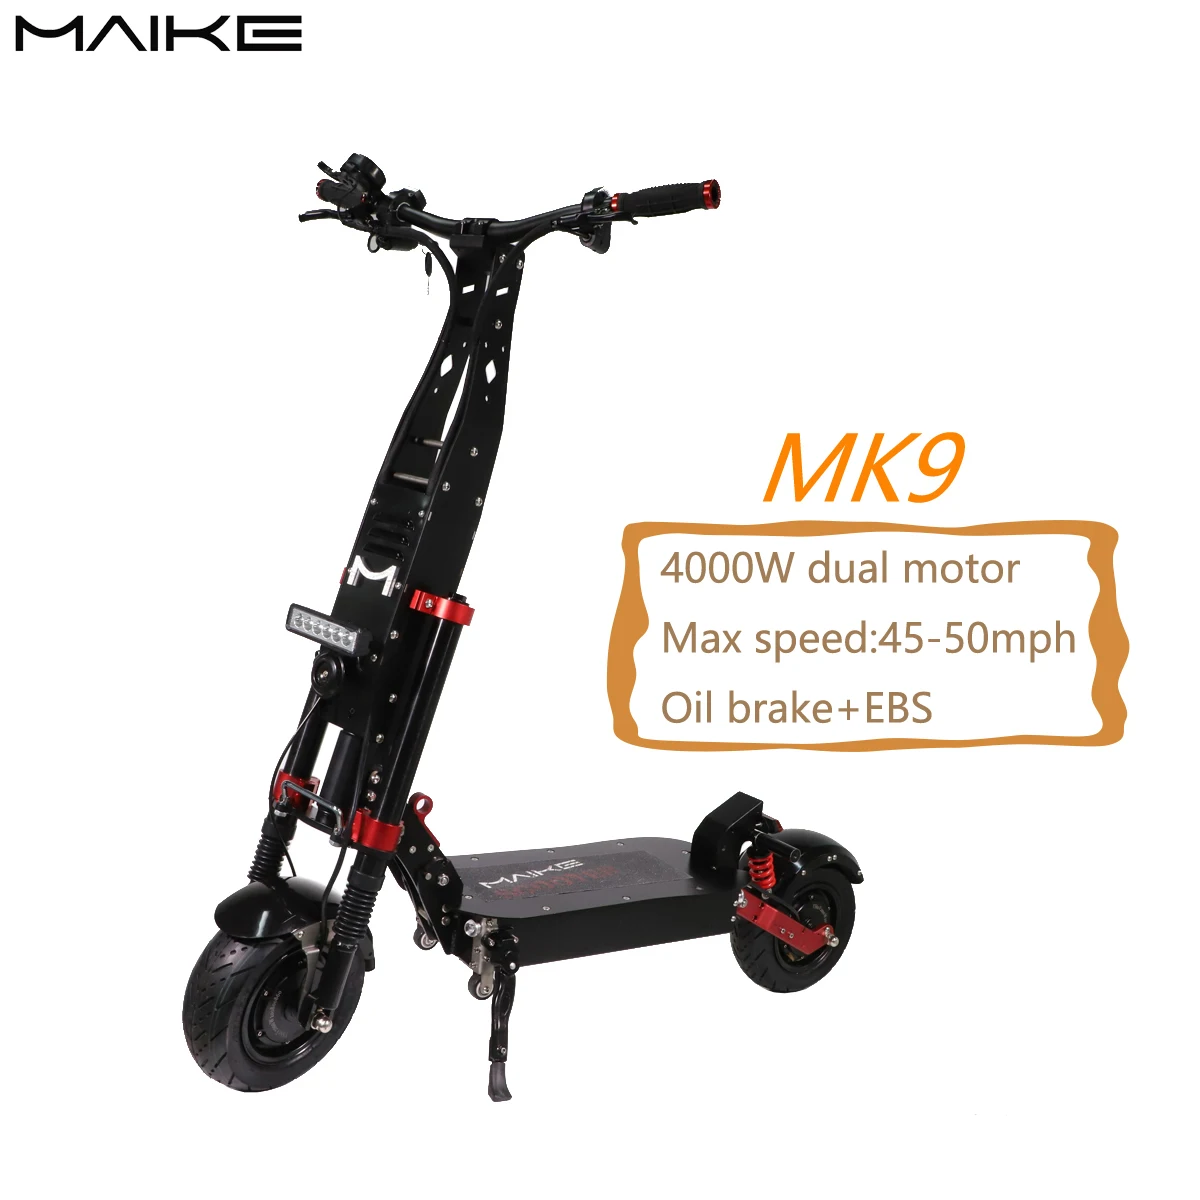 

Maike MK9 60v 26ah 4000W powerful high range fast electric scooter, Black&red